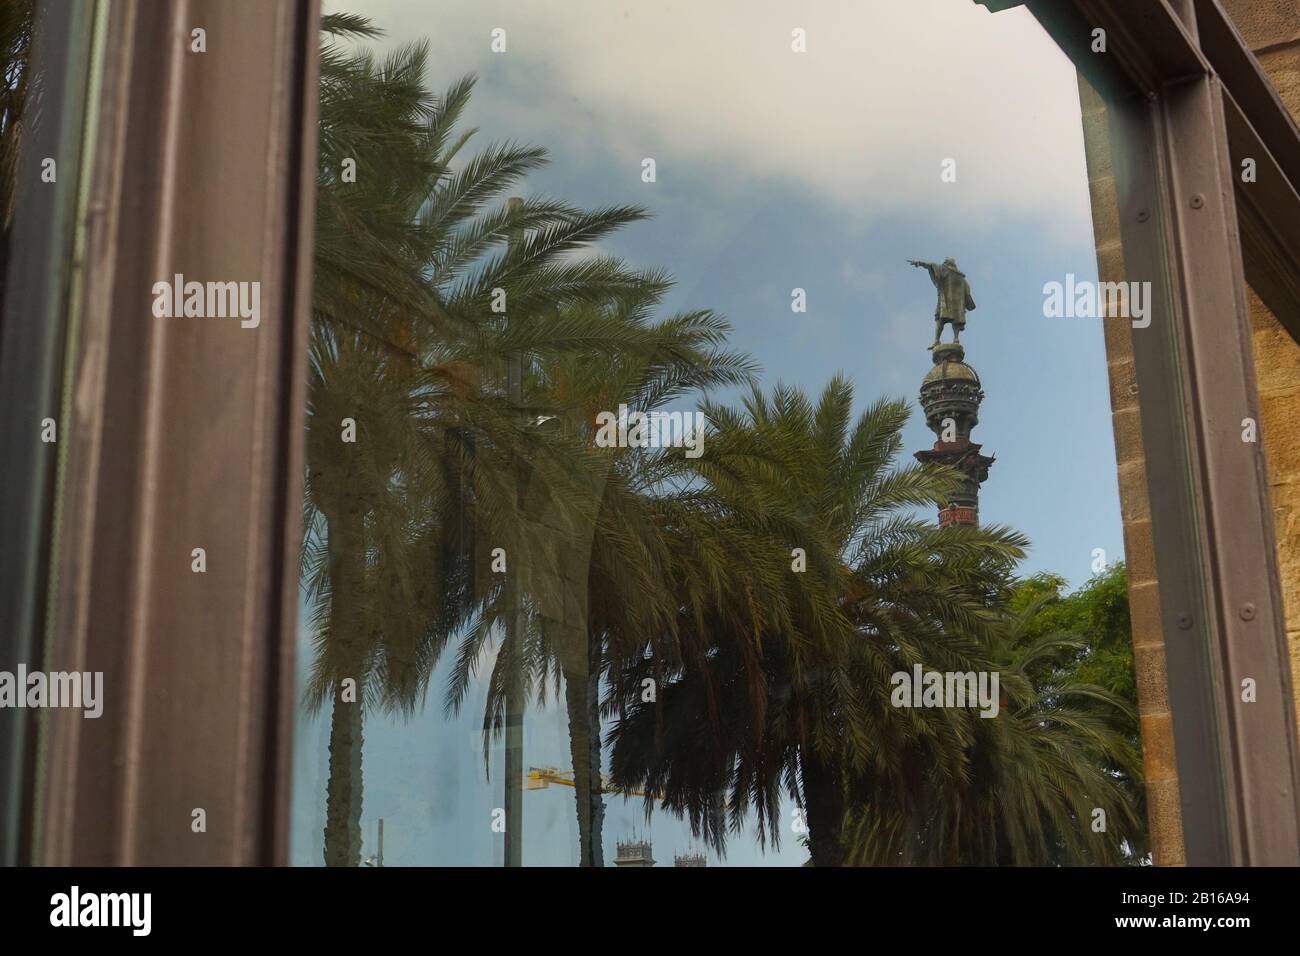 The reflection of Columbus statue pointing at the palm trees surrounded by the window frame Stock Photo